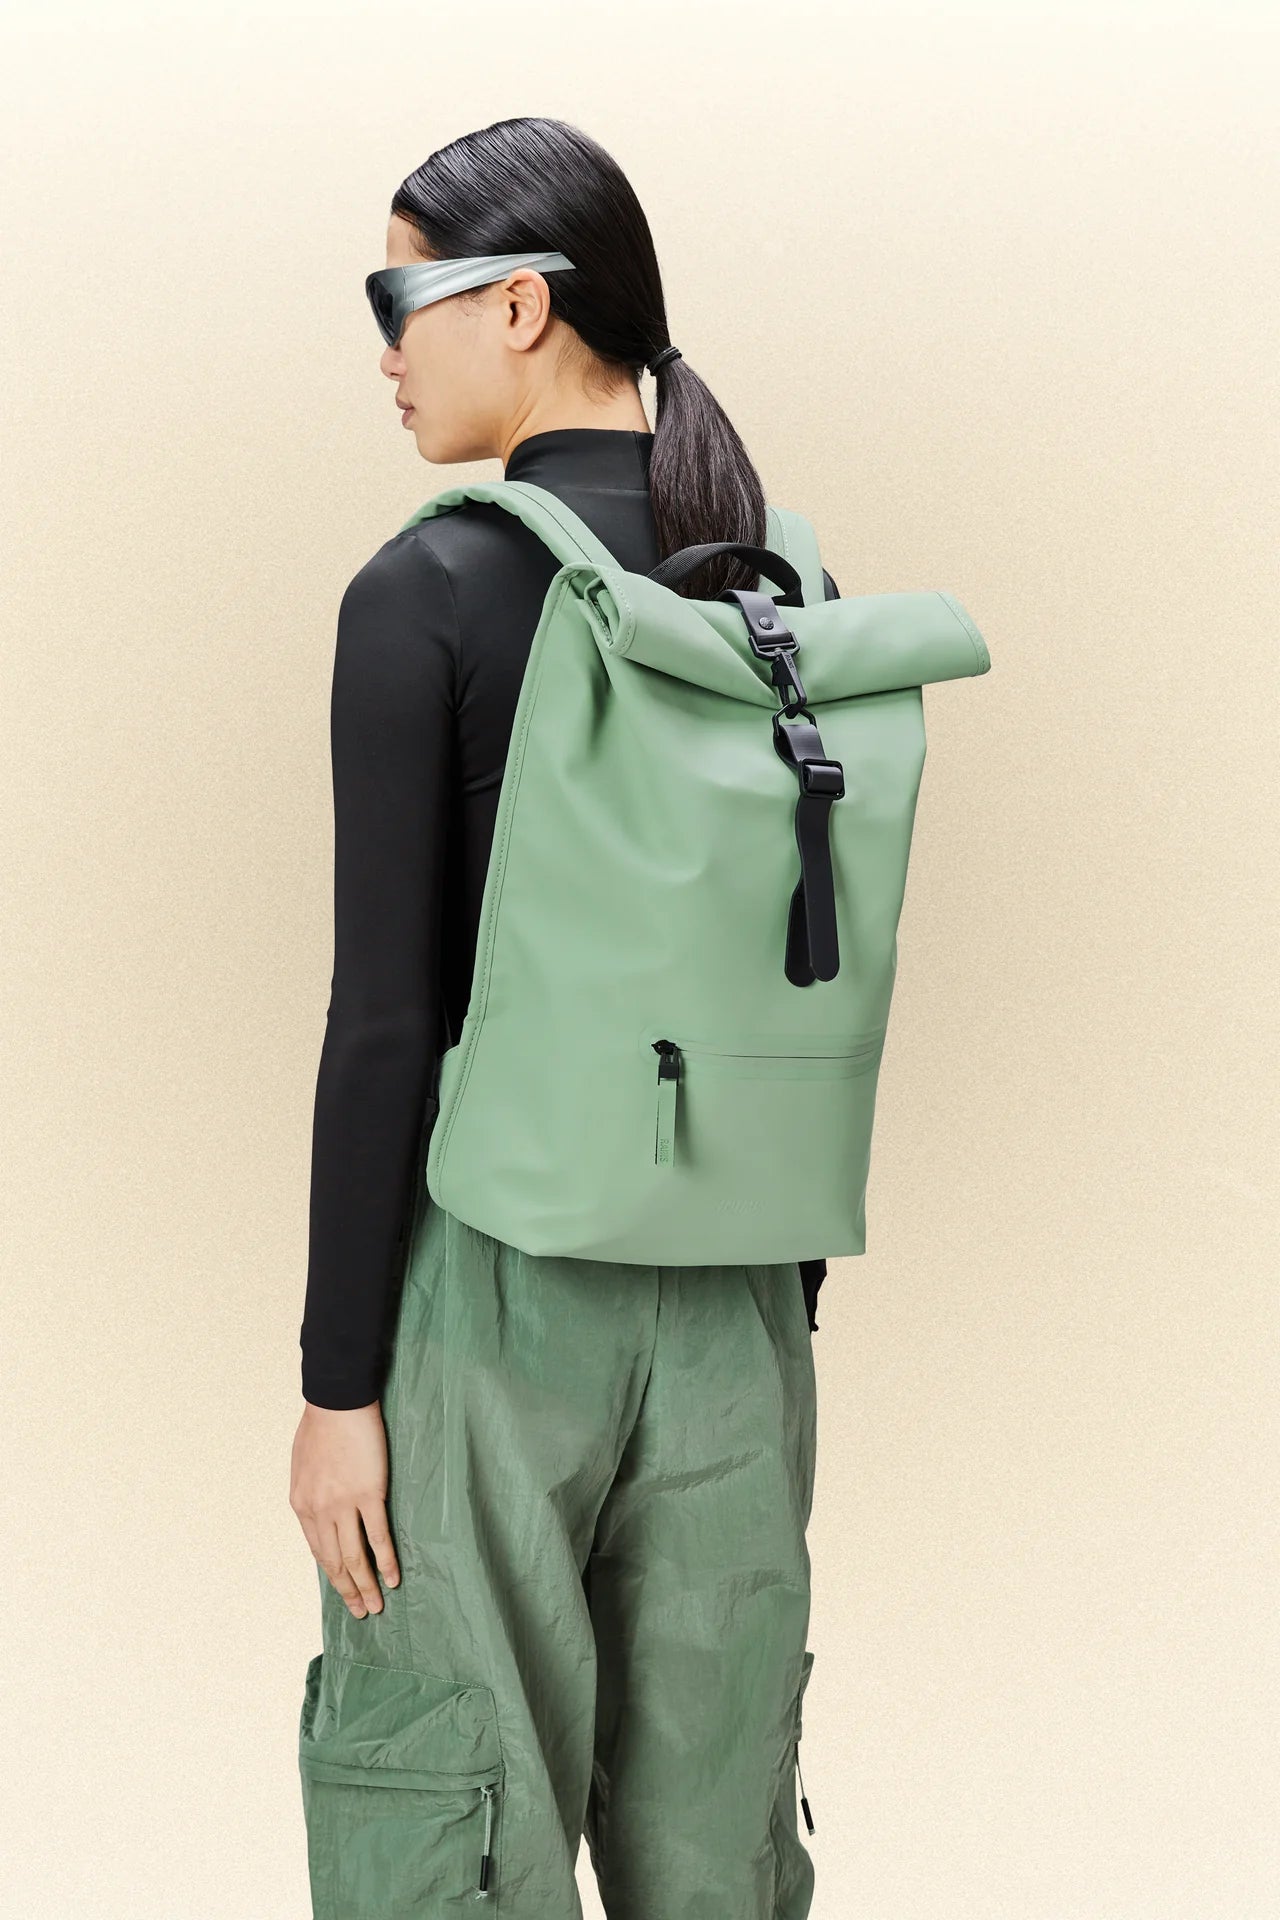 A woman wearing green pants and a Rains Rolltop Rucksack with a laptop pocket.